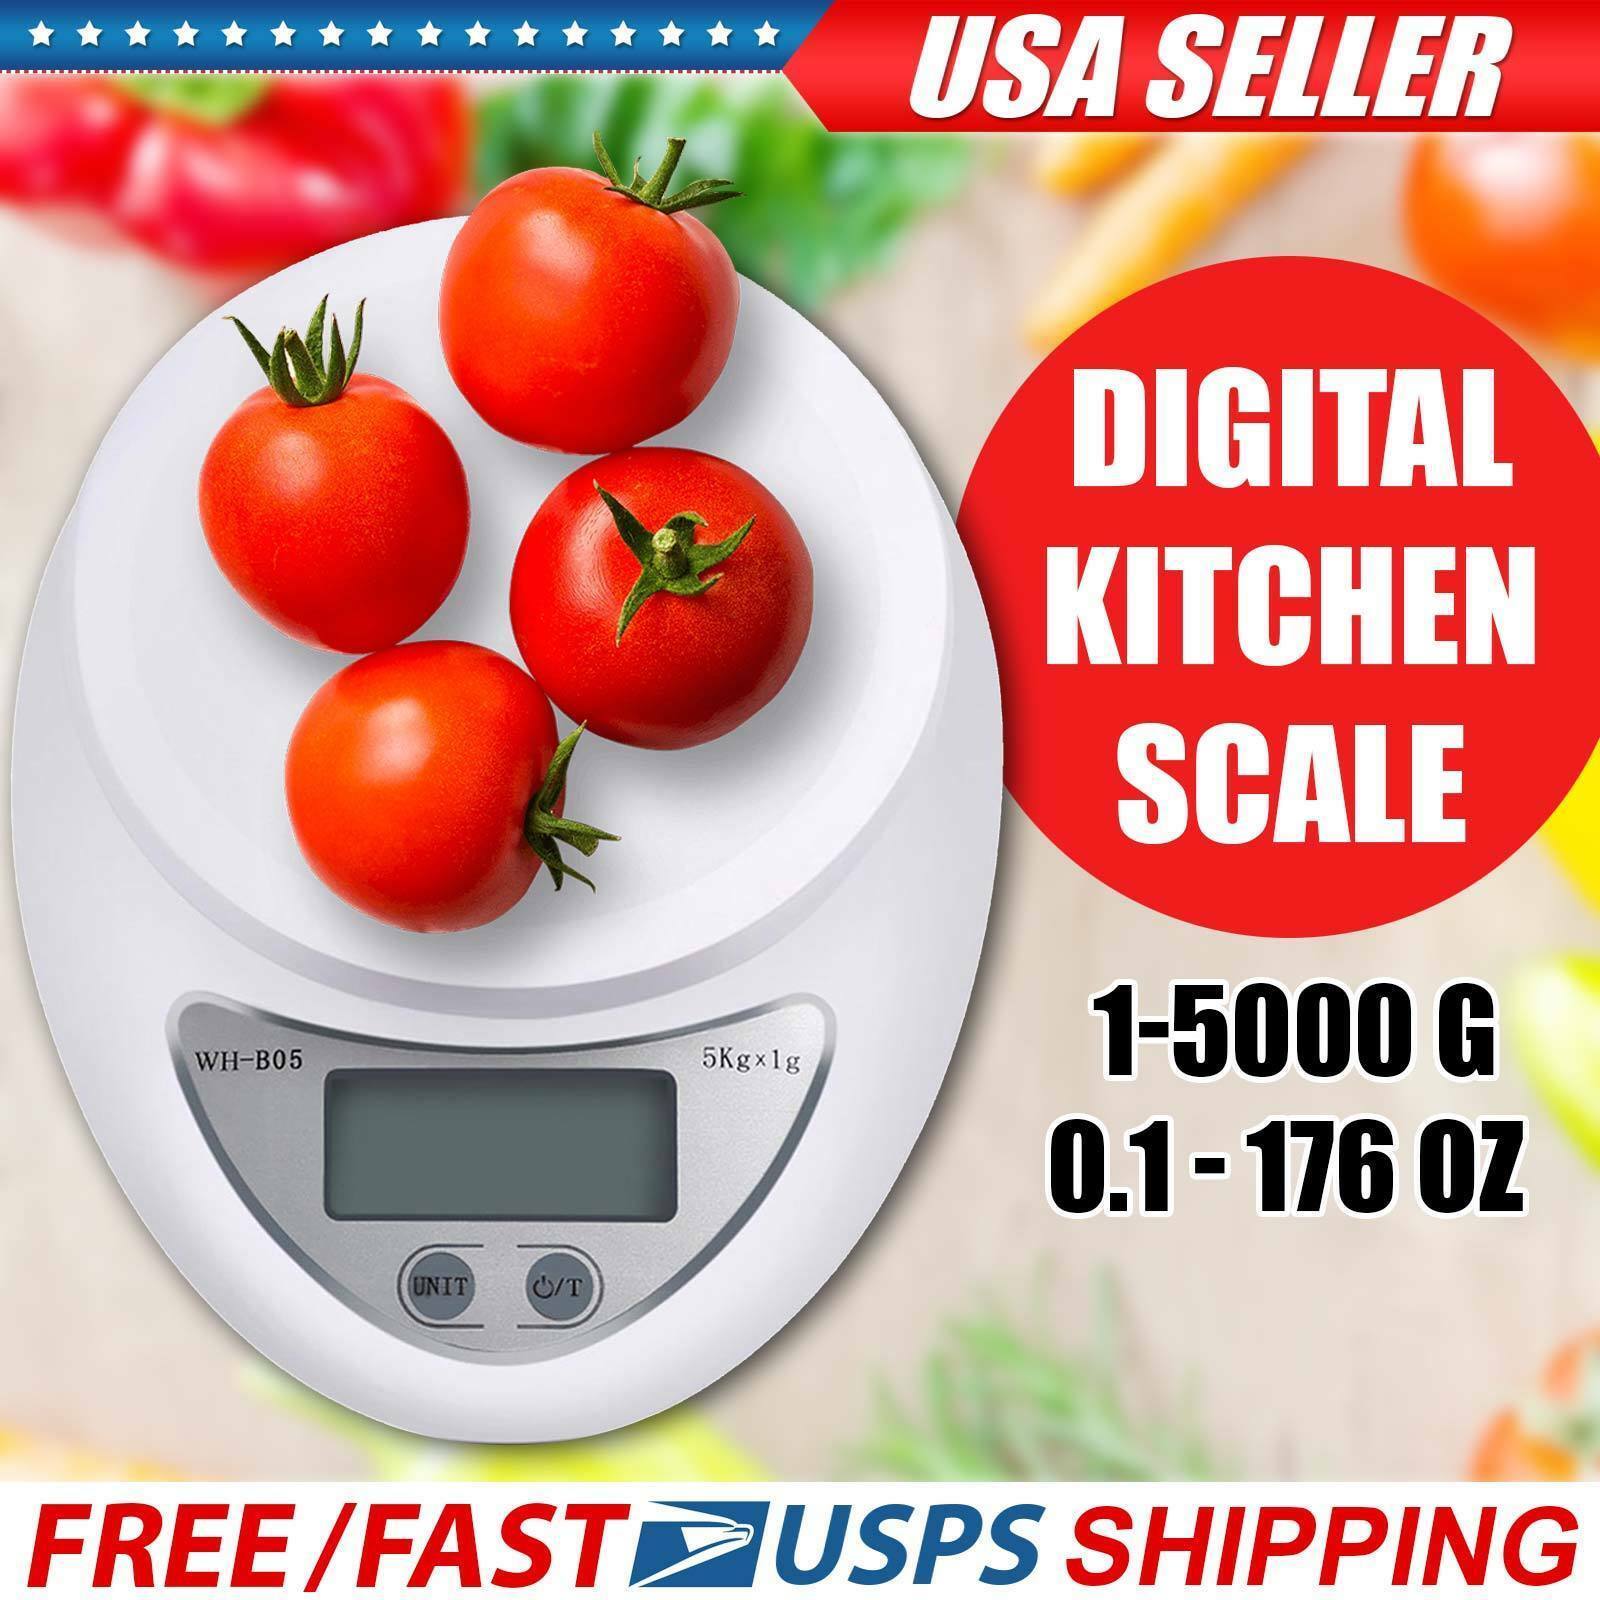 New Digital Kitchen Food Cooking Scale Weigh In Pounds, Grams, Ounces, And Kg